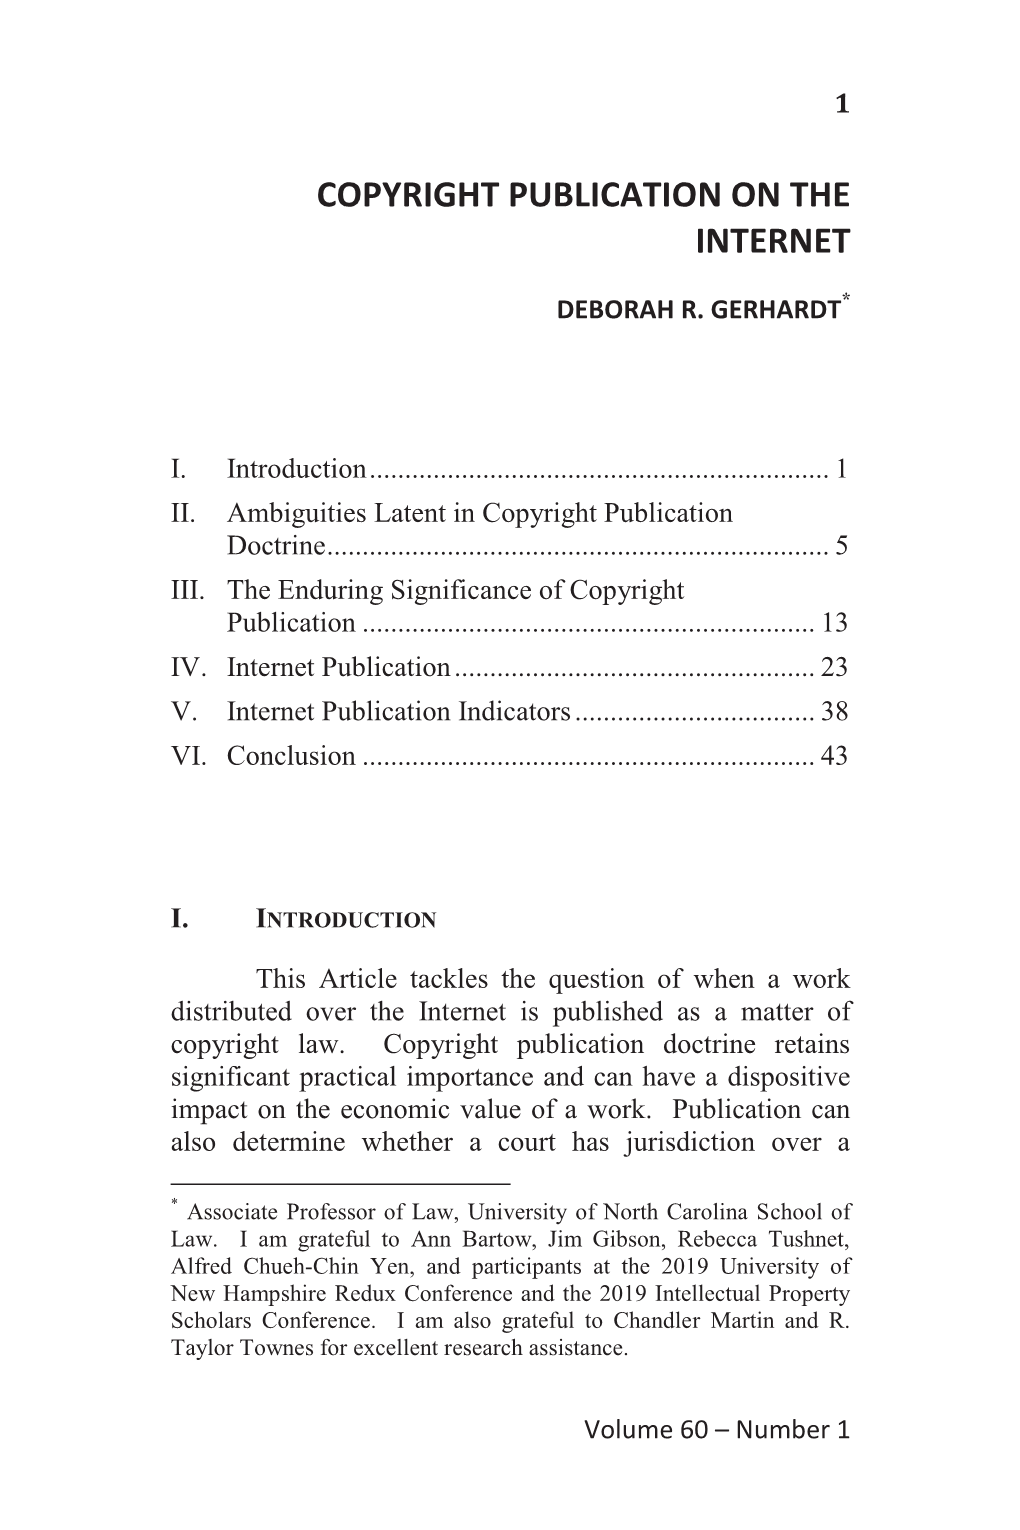 Copyright Publication on the Internet